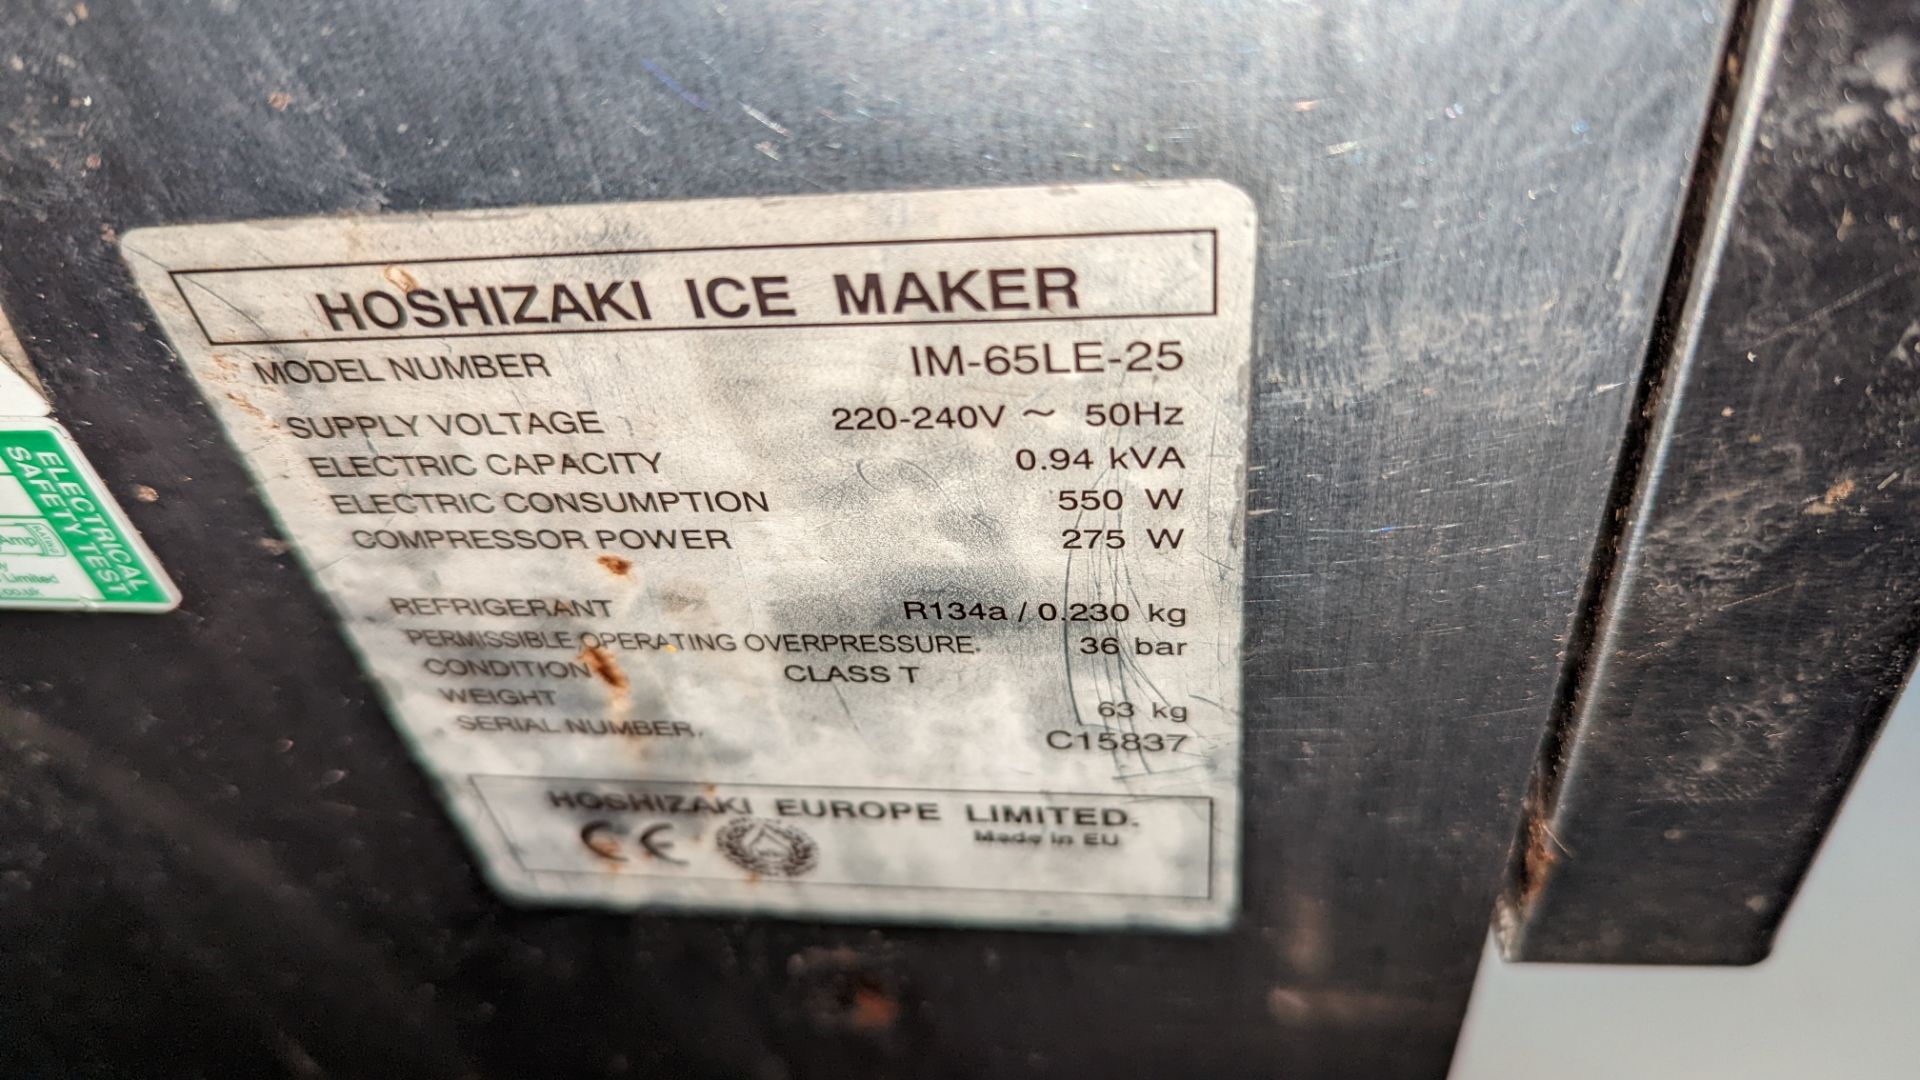 Hoshizaki stainless steel commercial ice maker - Image 4 of 4